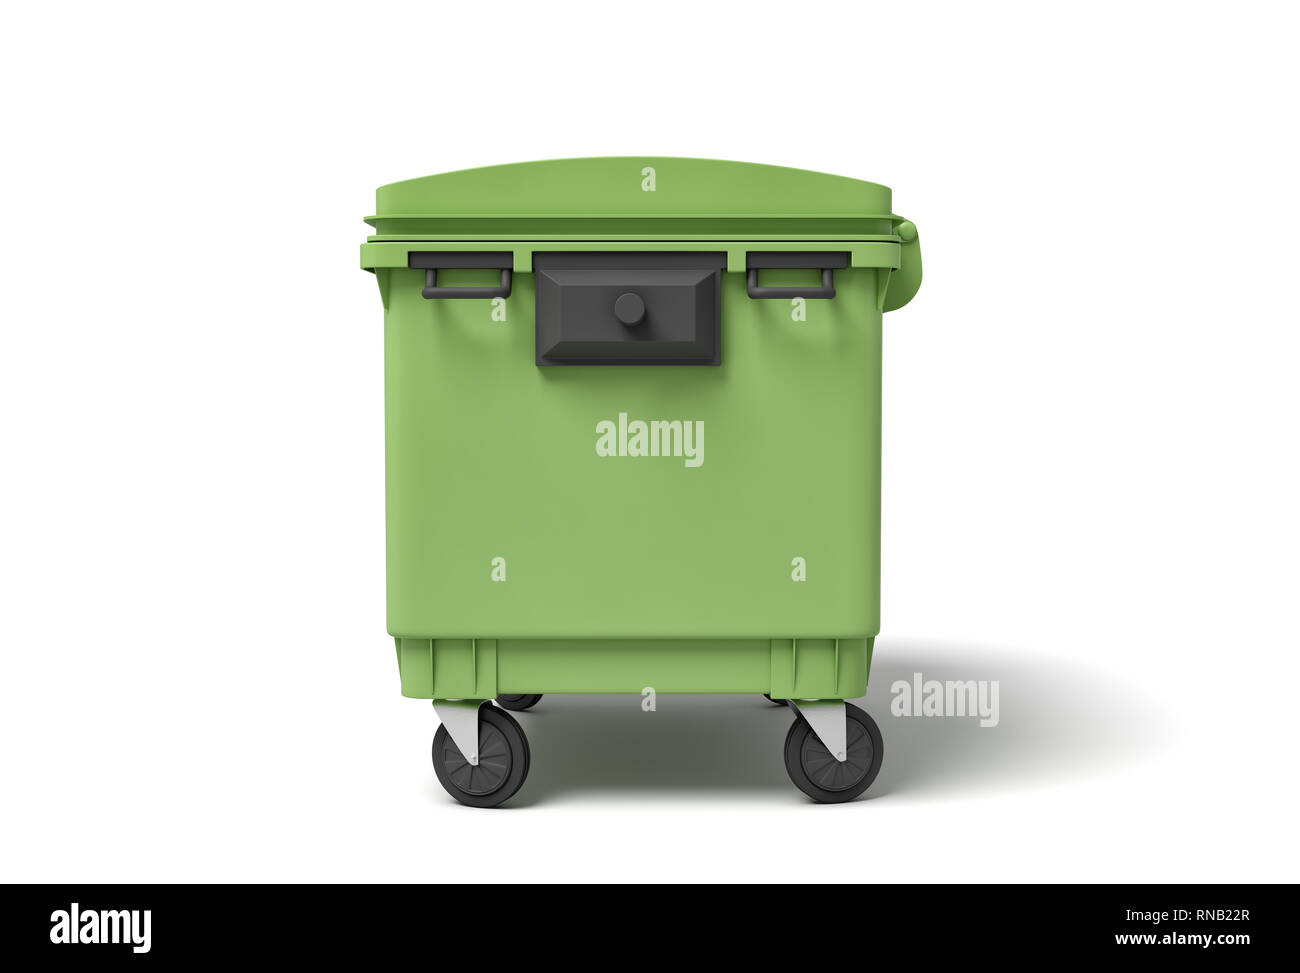 3d rendering of a light-green dumpster on white background. Stock Photo